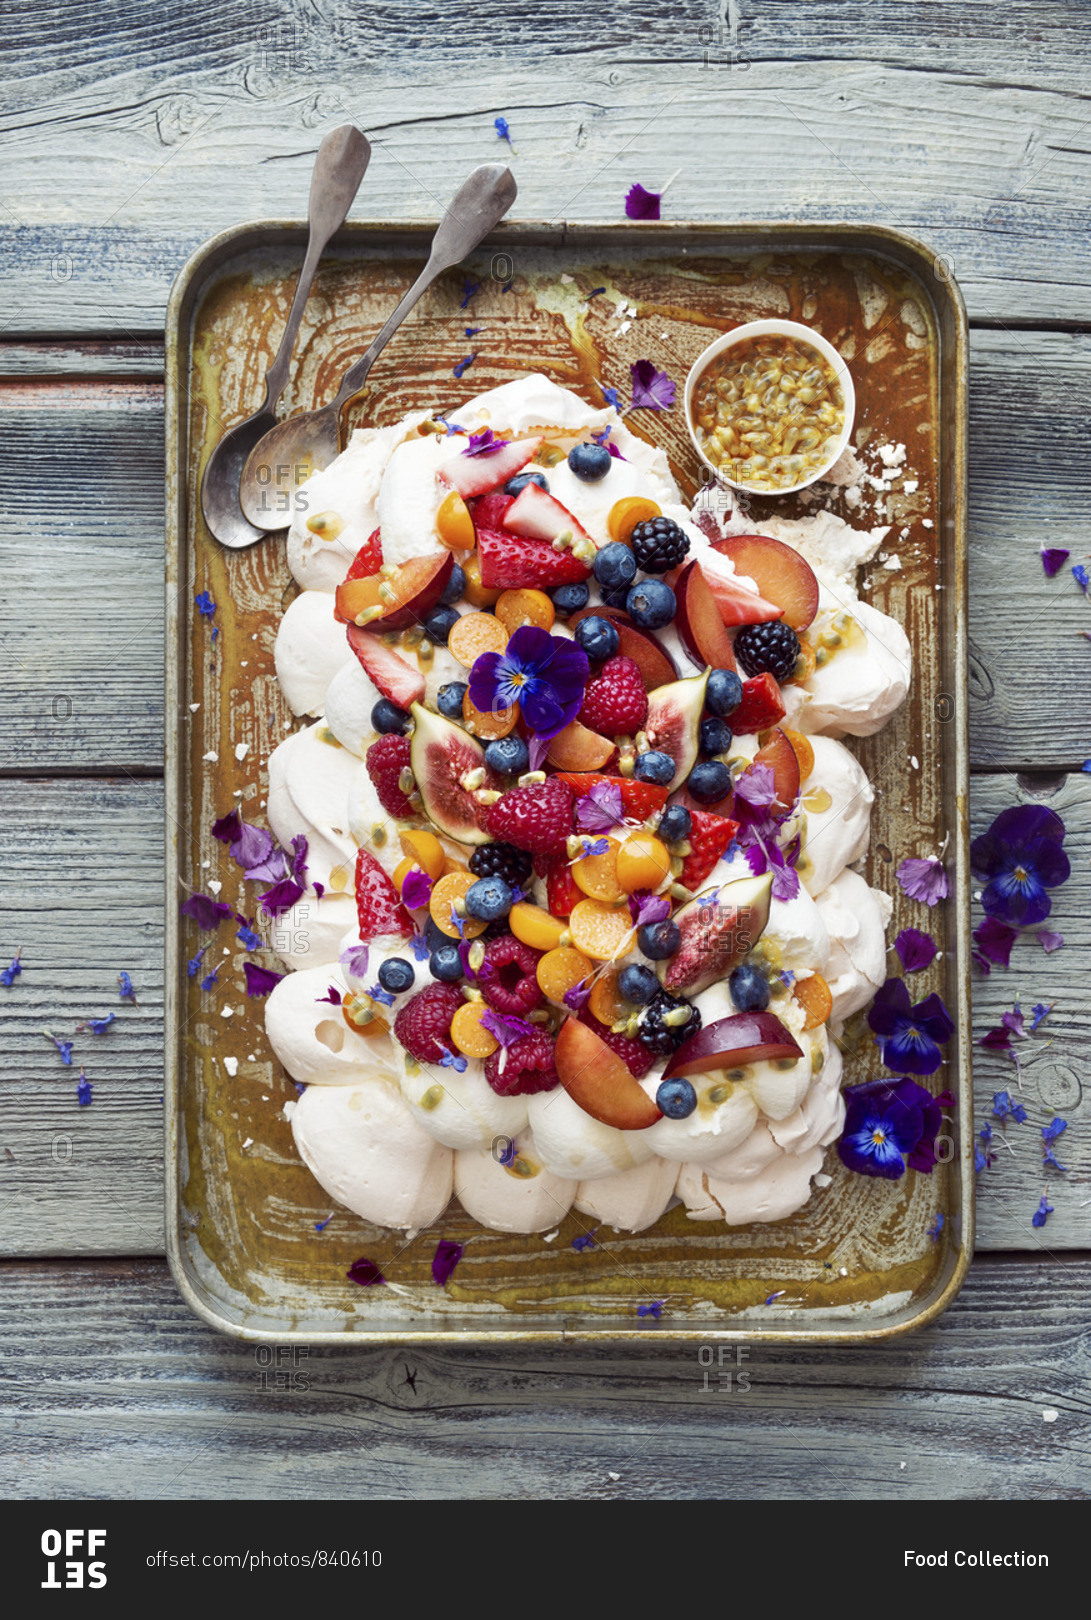 Pavlova with fruit, berries and a passion fruit topping